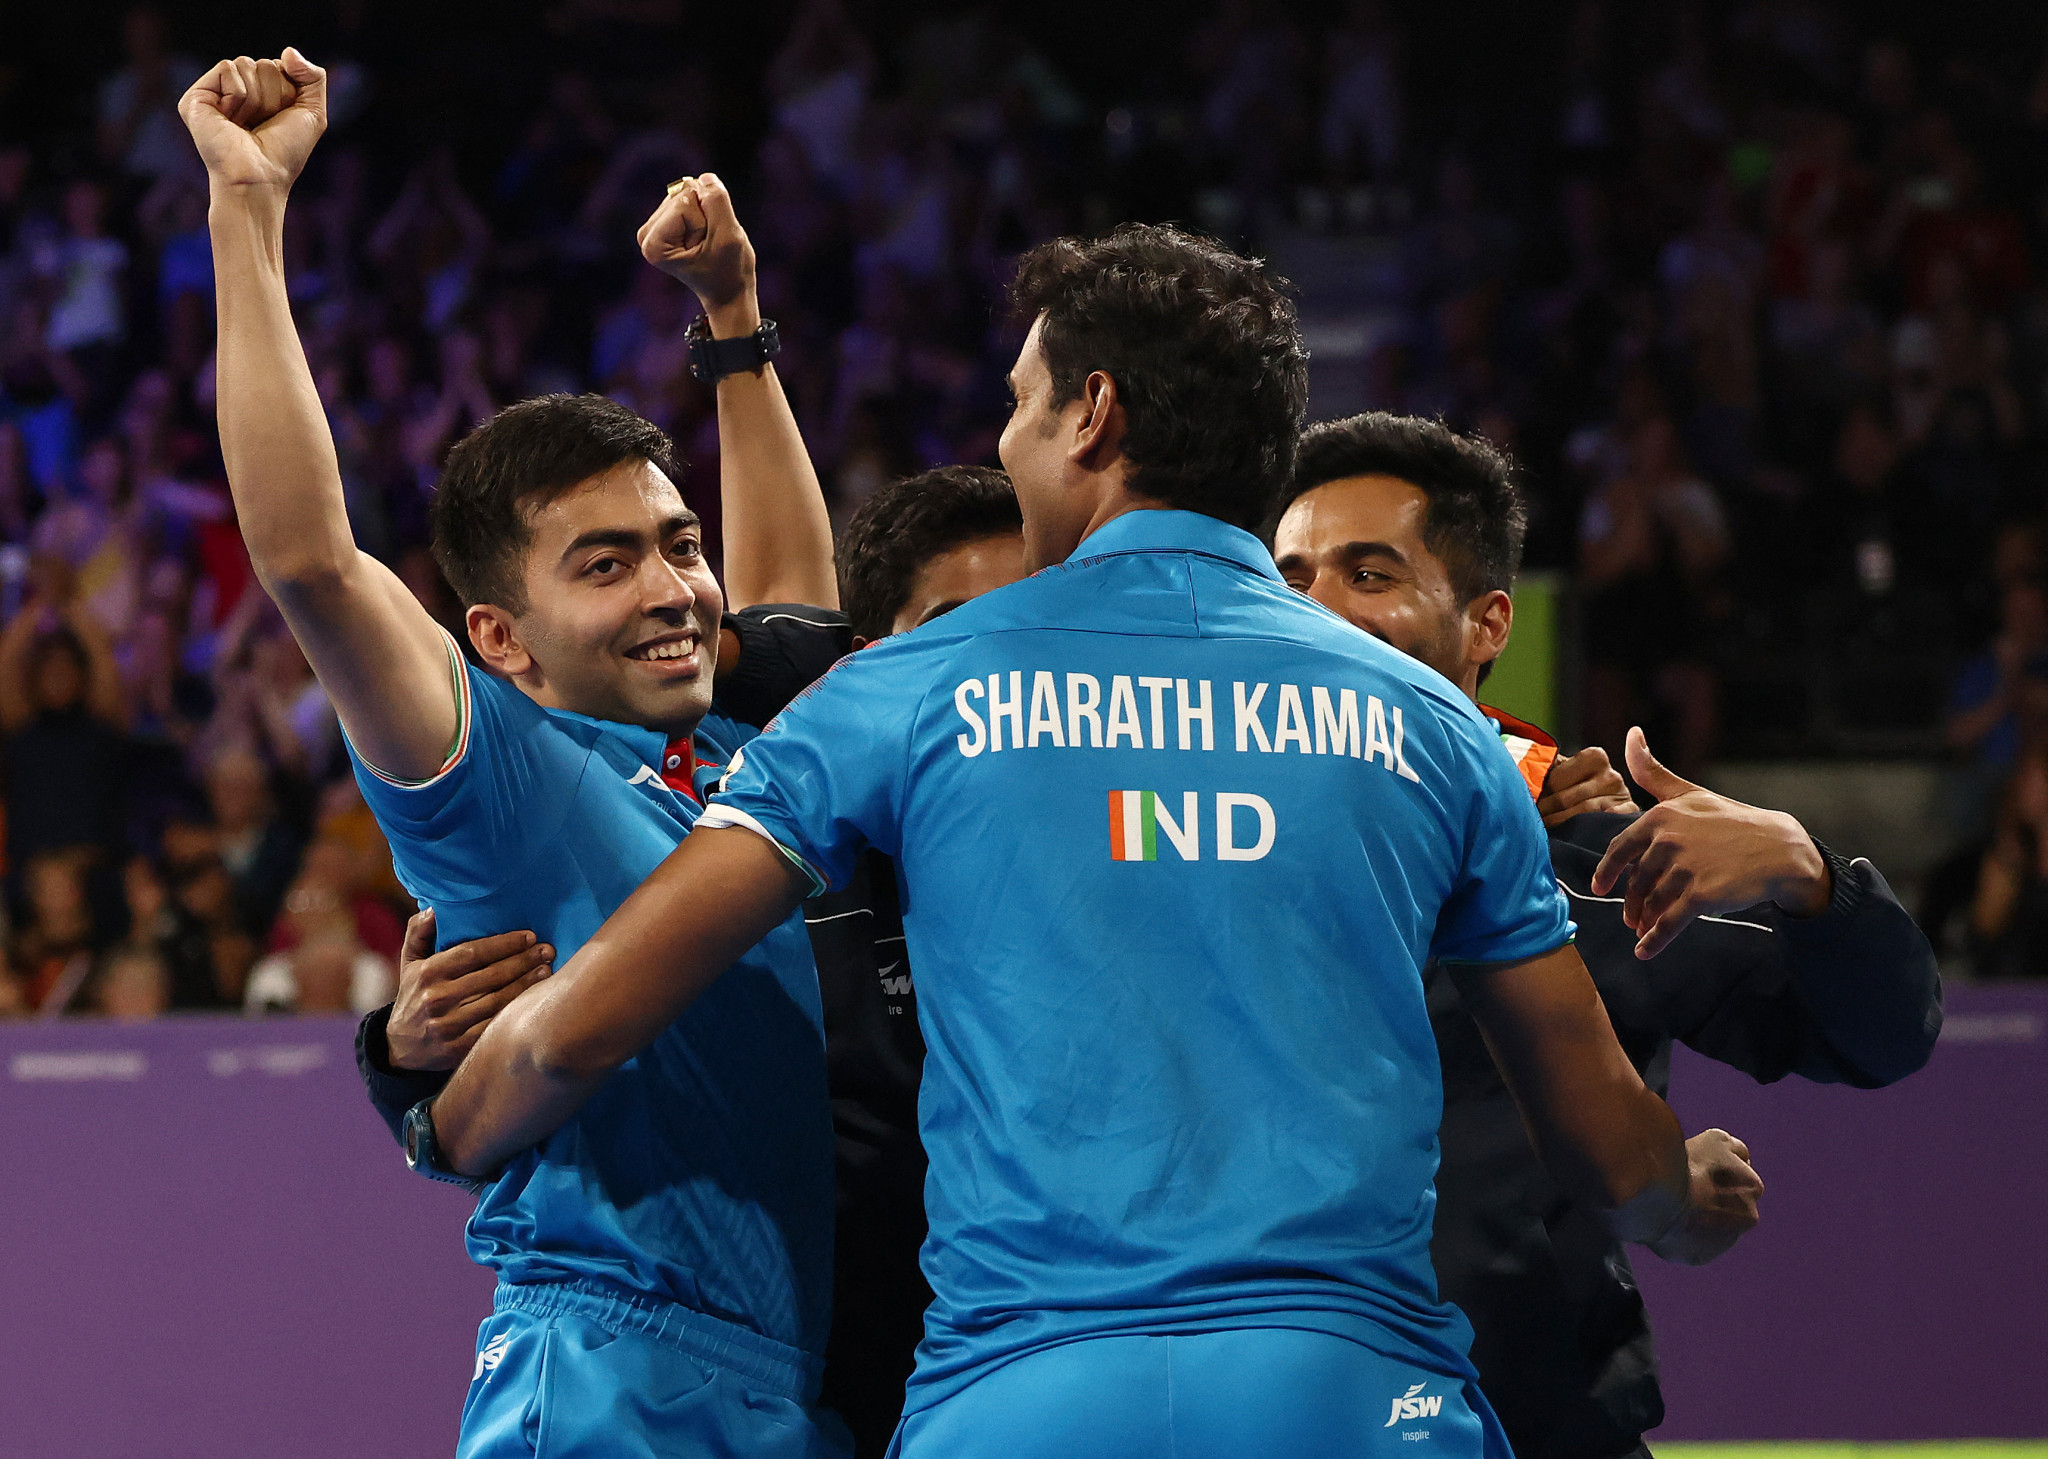 Dasai and Gnanasekaran propel India to successful defence of men's team table tennis title